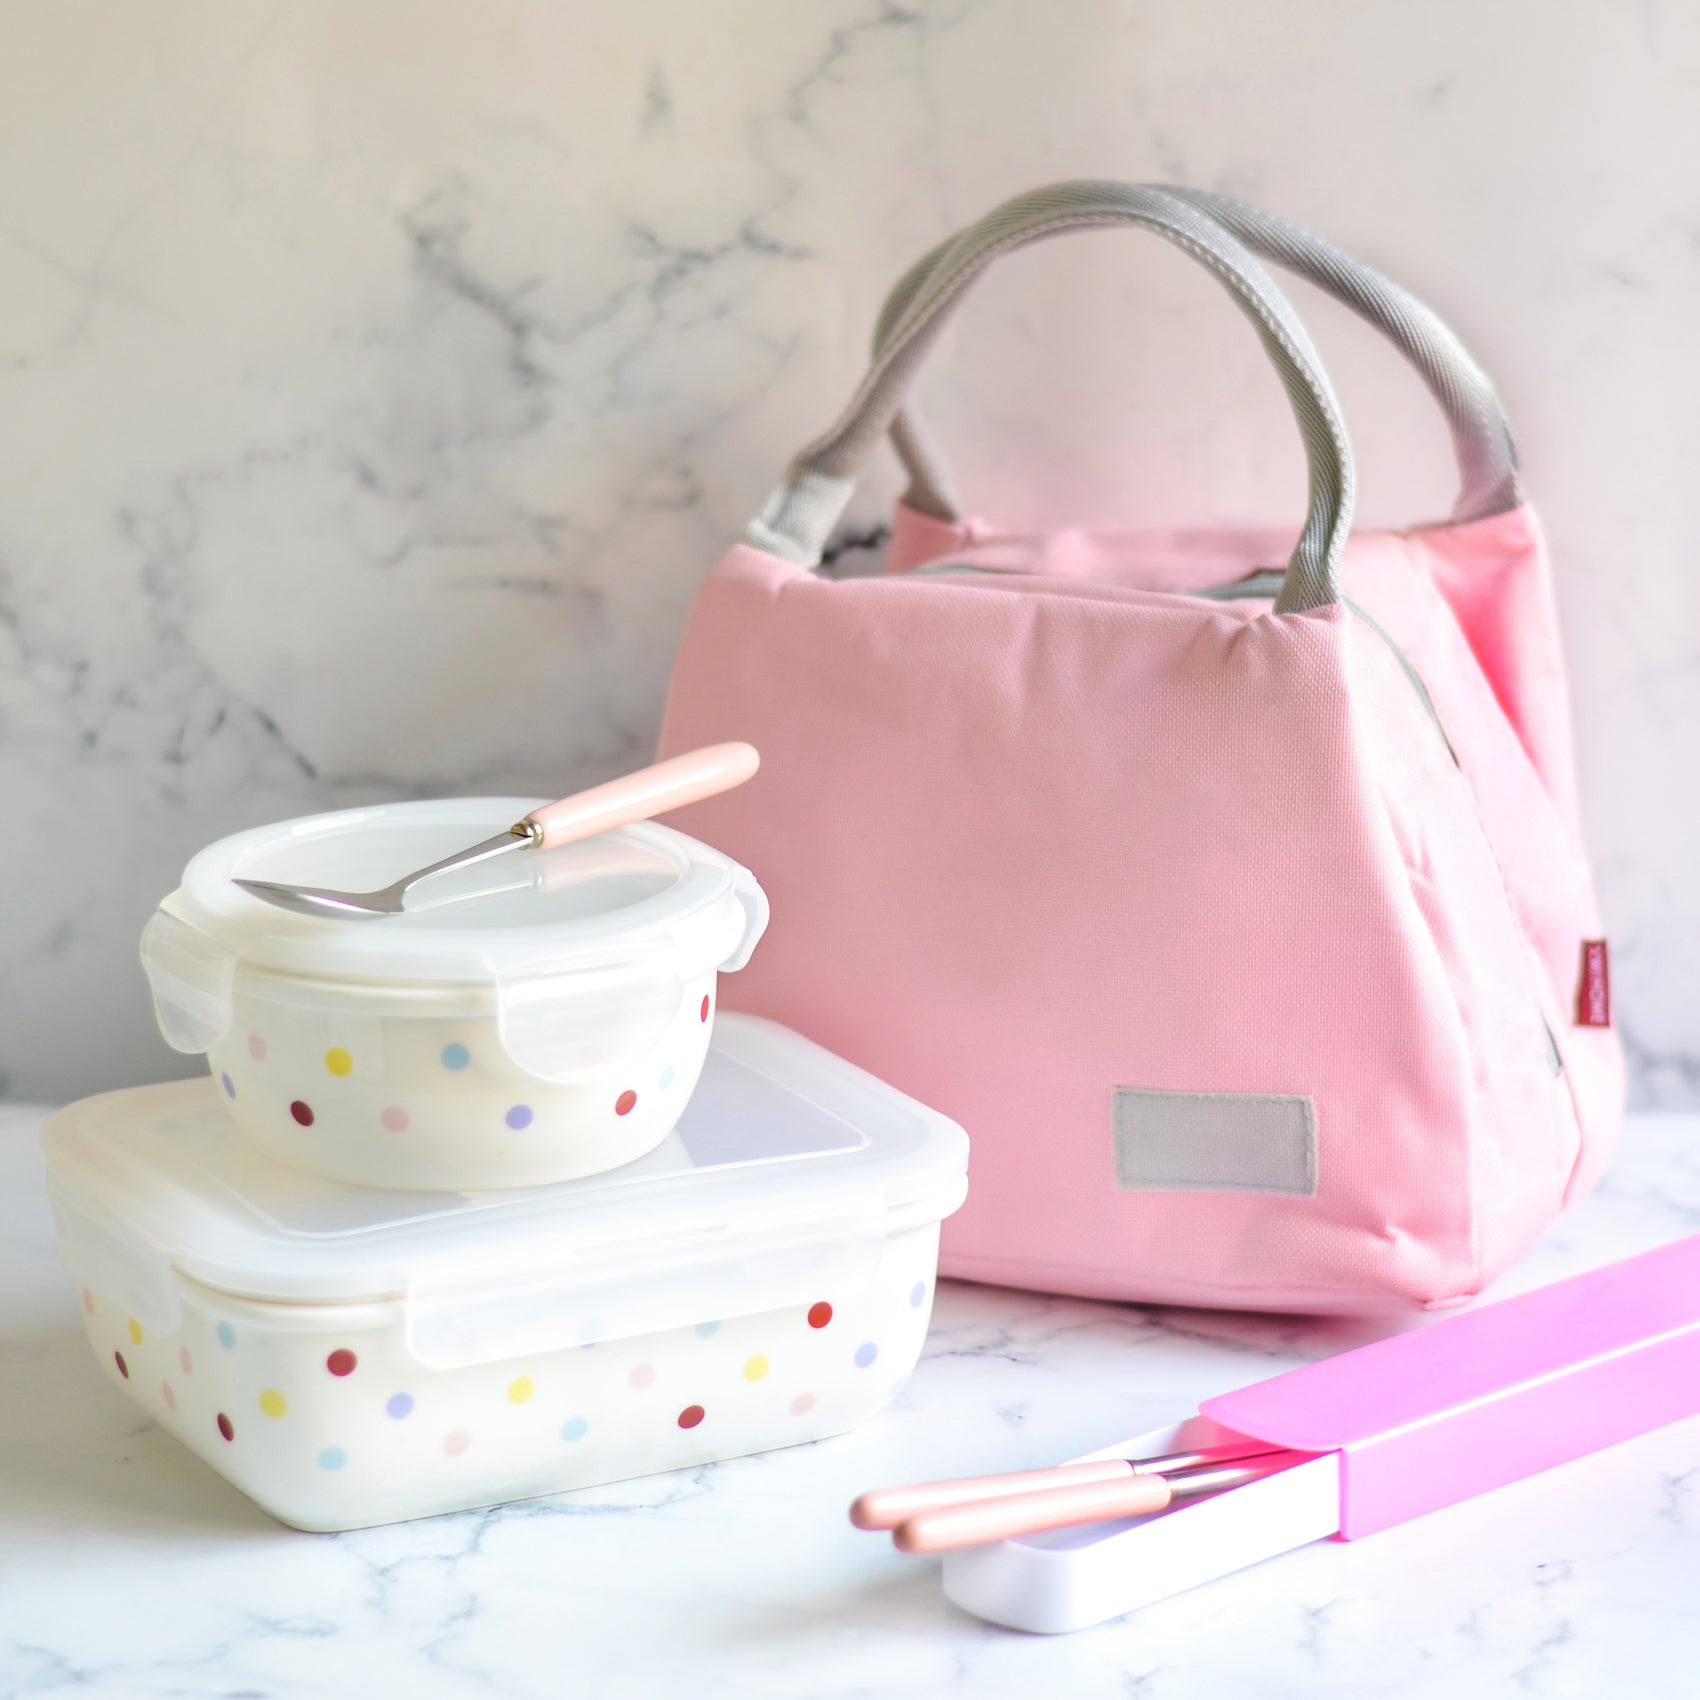 Lunch Bags - Buy Pink Lunch Bags Online For Lunch Box |Nestasia